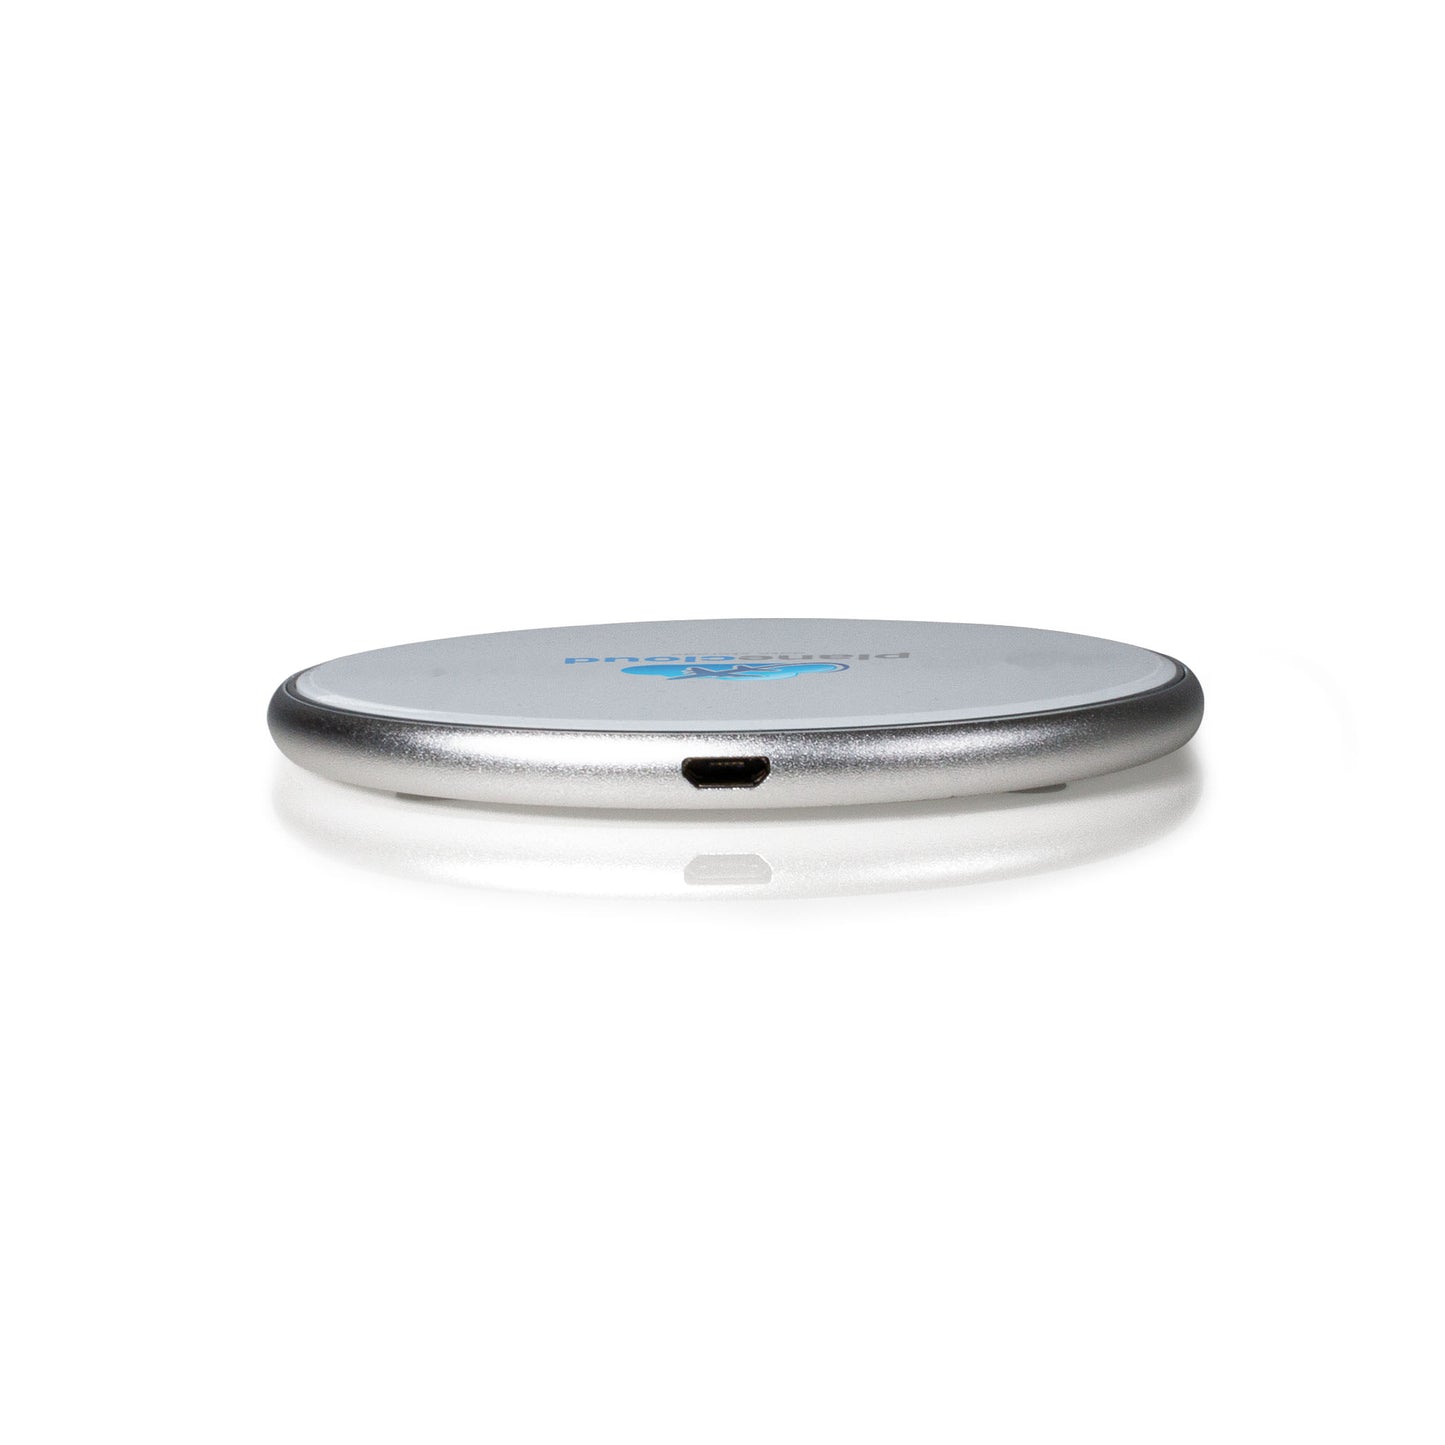 MagWire "classic" Wireless Charger